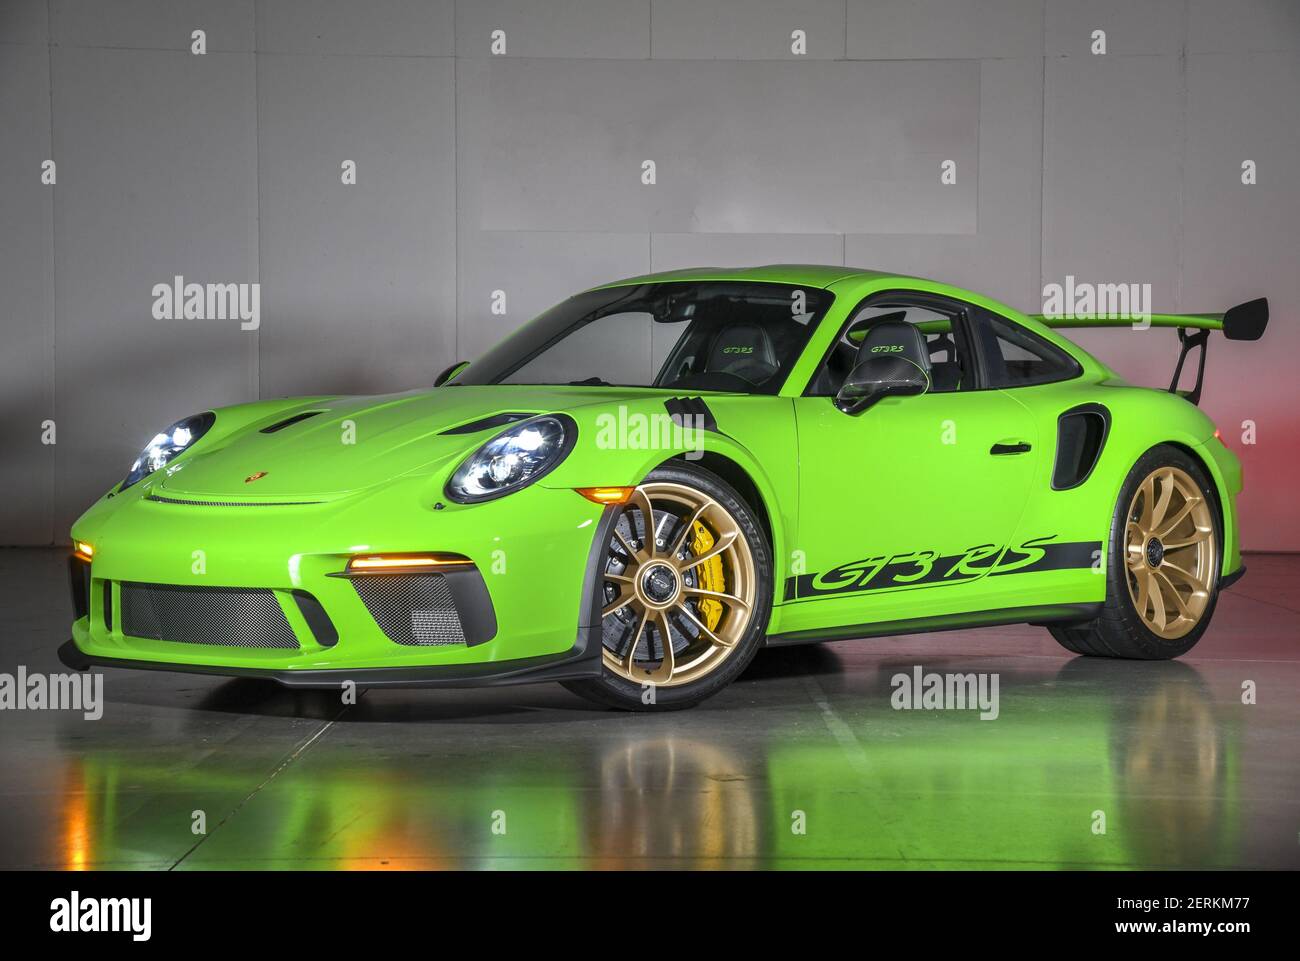 Sept 15, 2018: 2019 Porsche 911 GT3 RS comes equipped with a 4.0